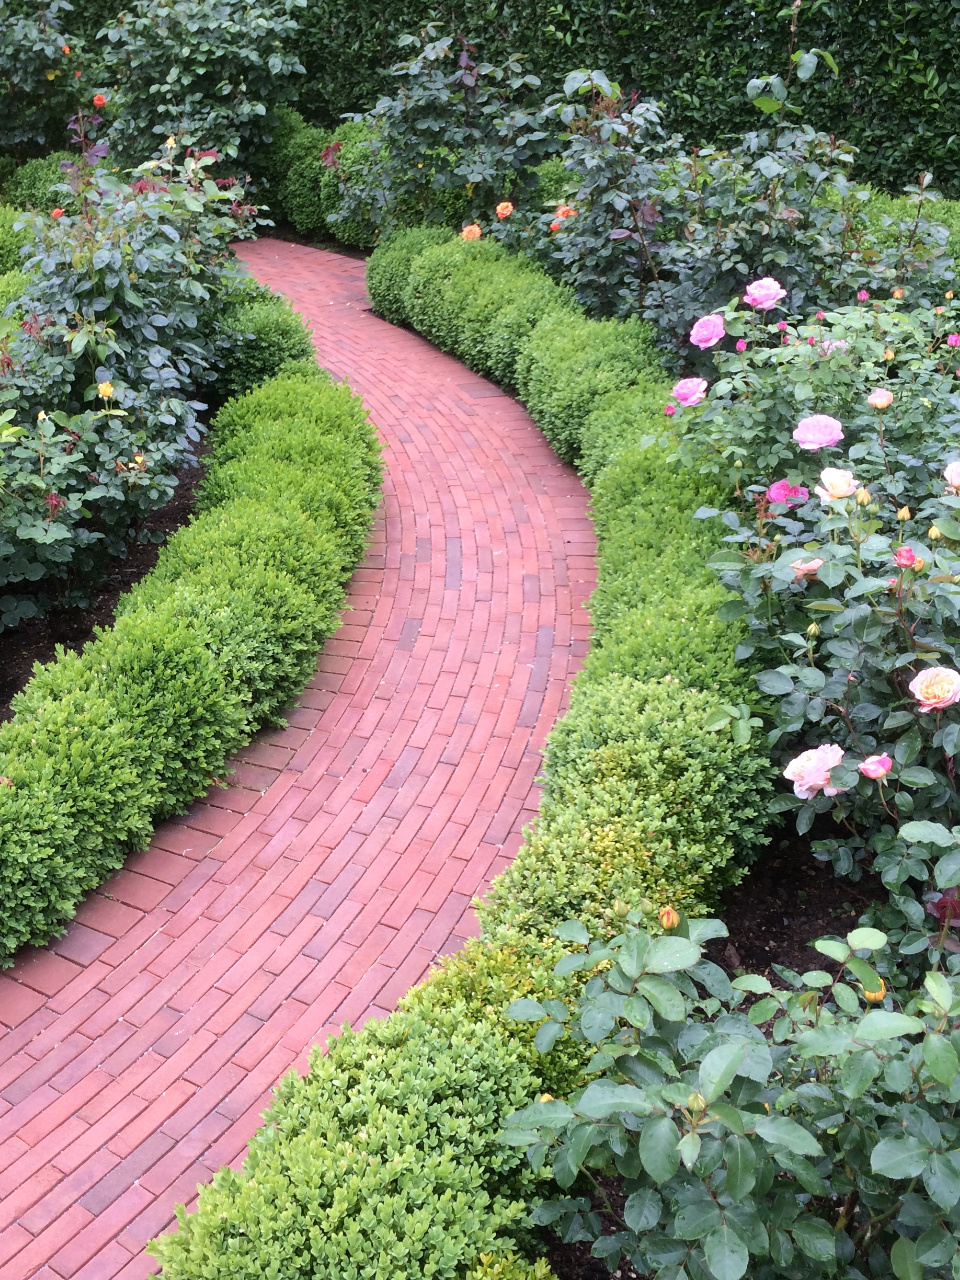 Brick walkway lined with low green bushes and rosebushes